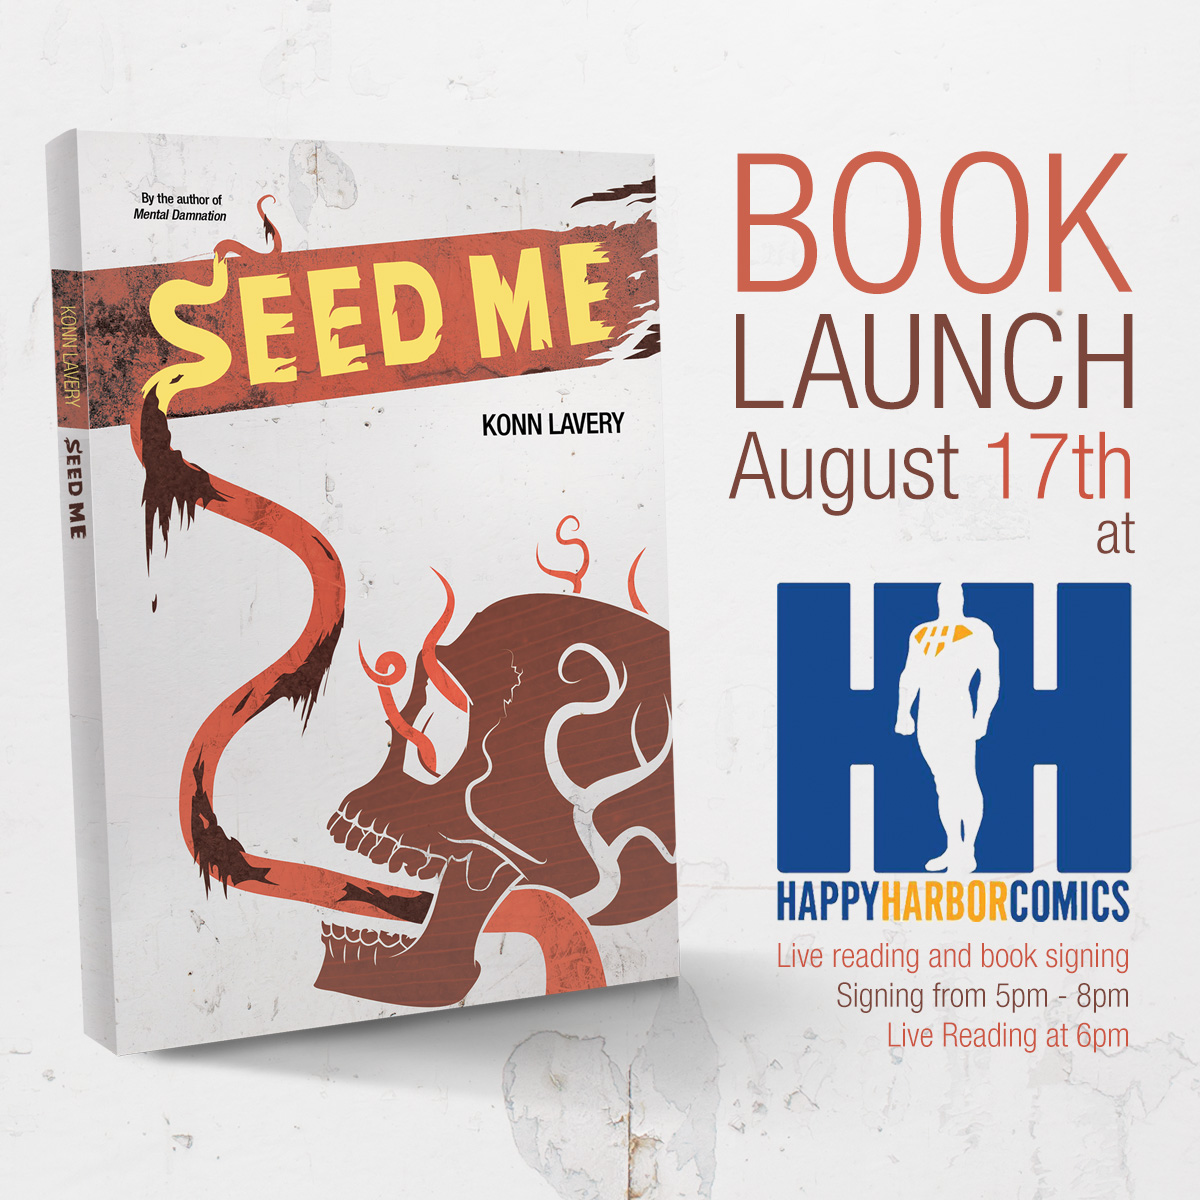 Seed Me Book Launch at Happy Harbor Comics